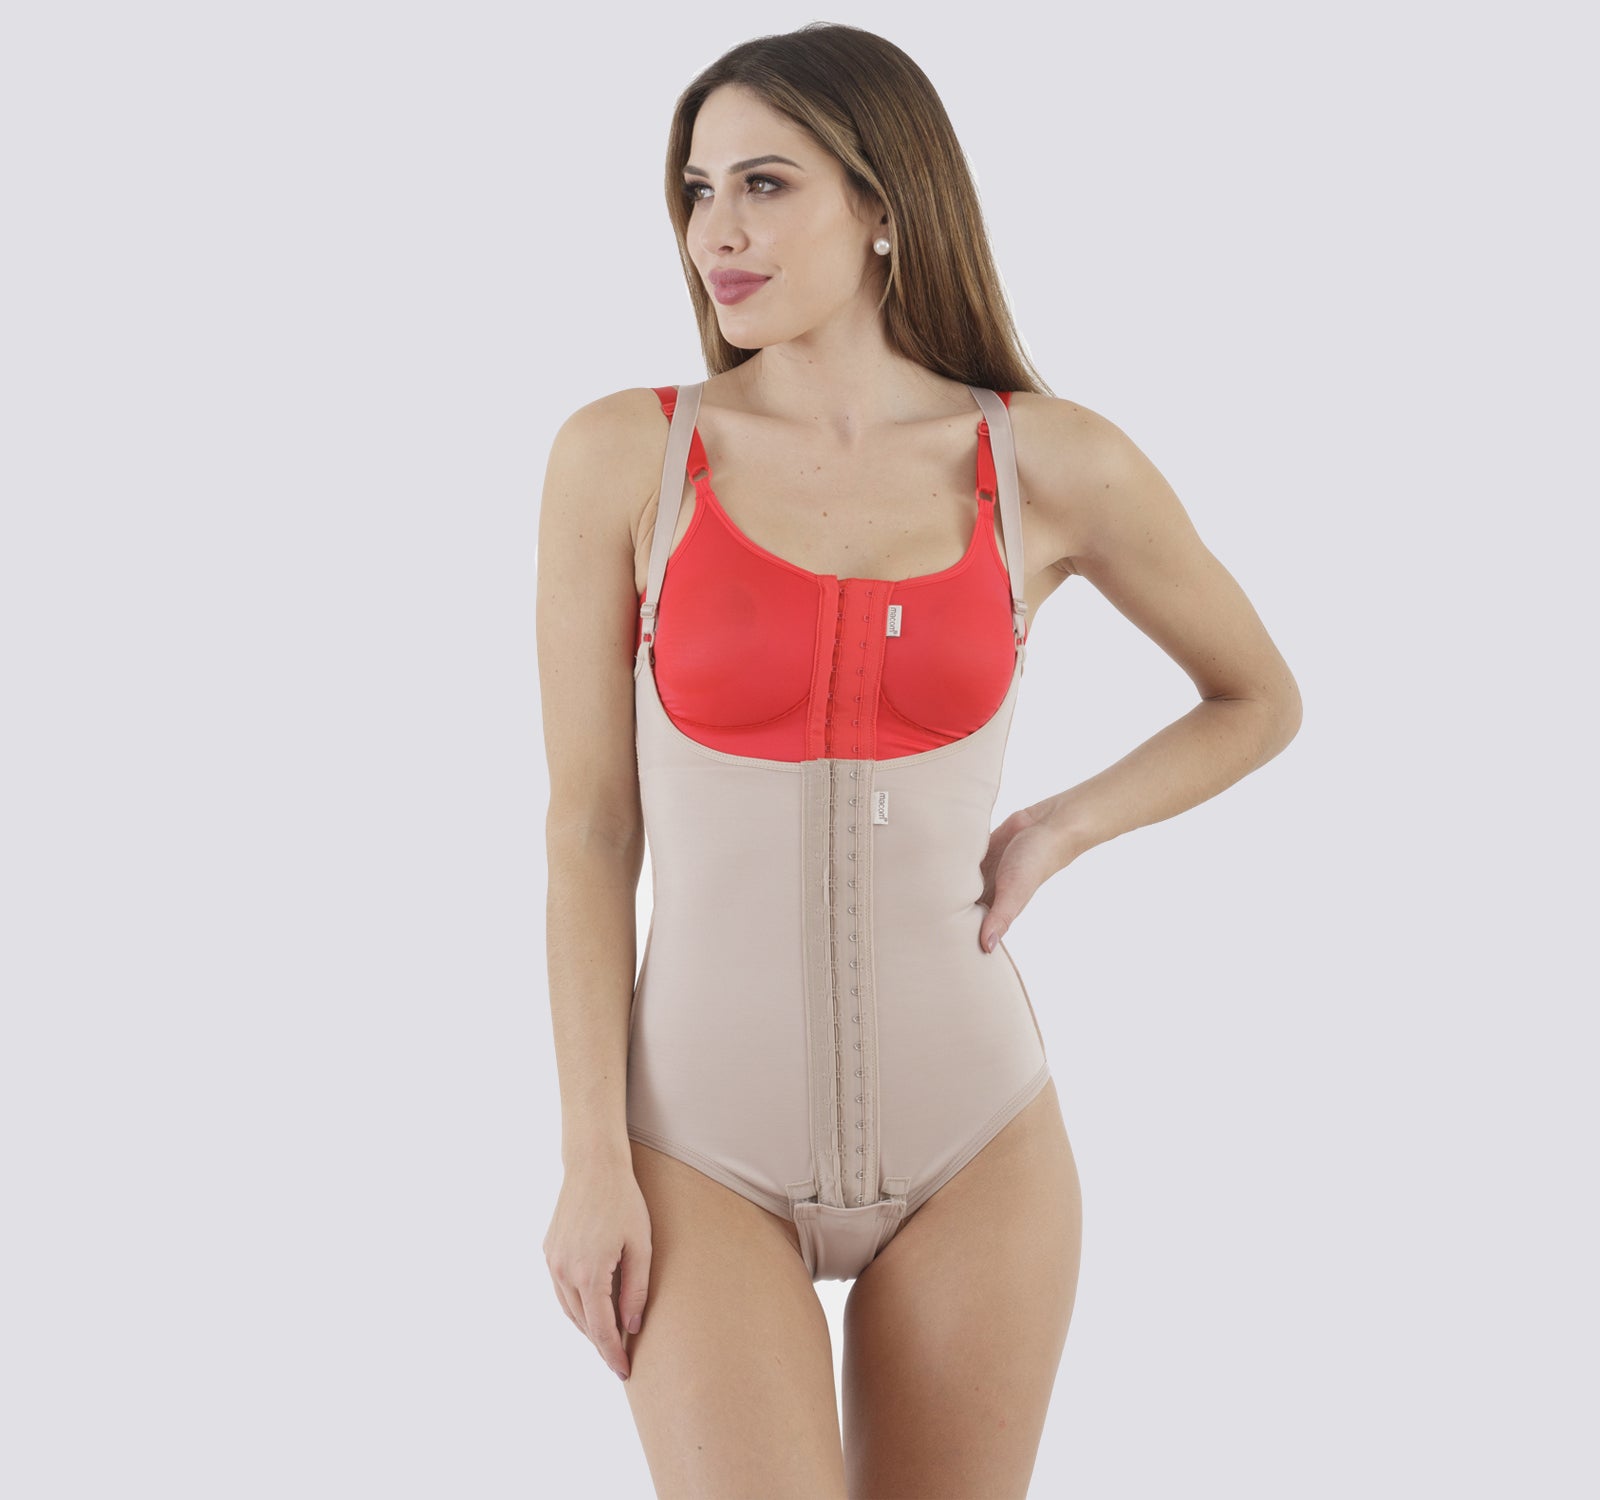 Compression garment after tummy tuck and abdominal liposuction